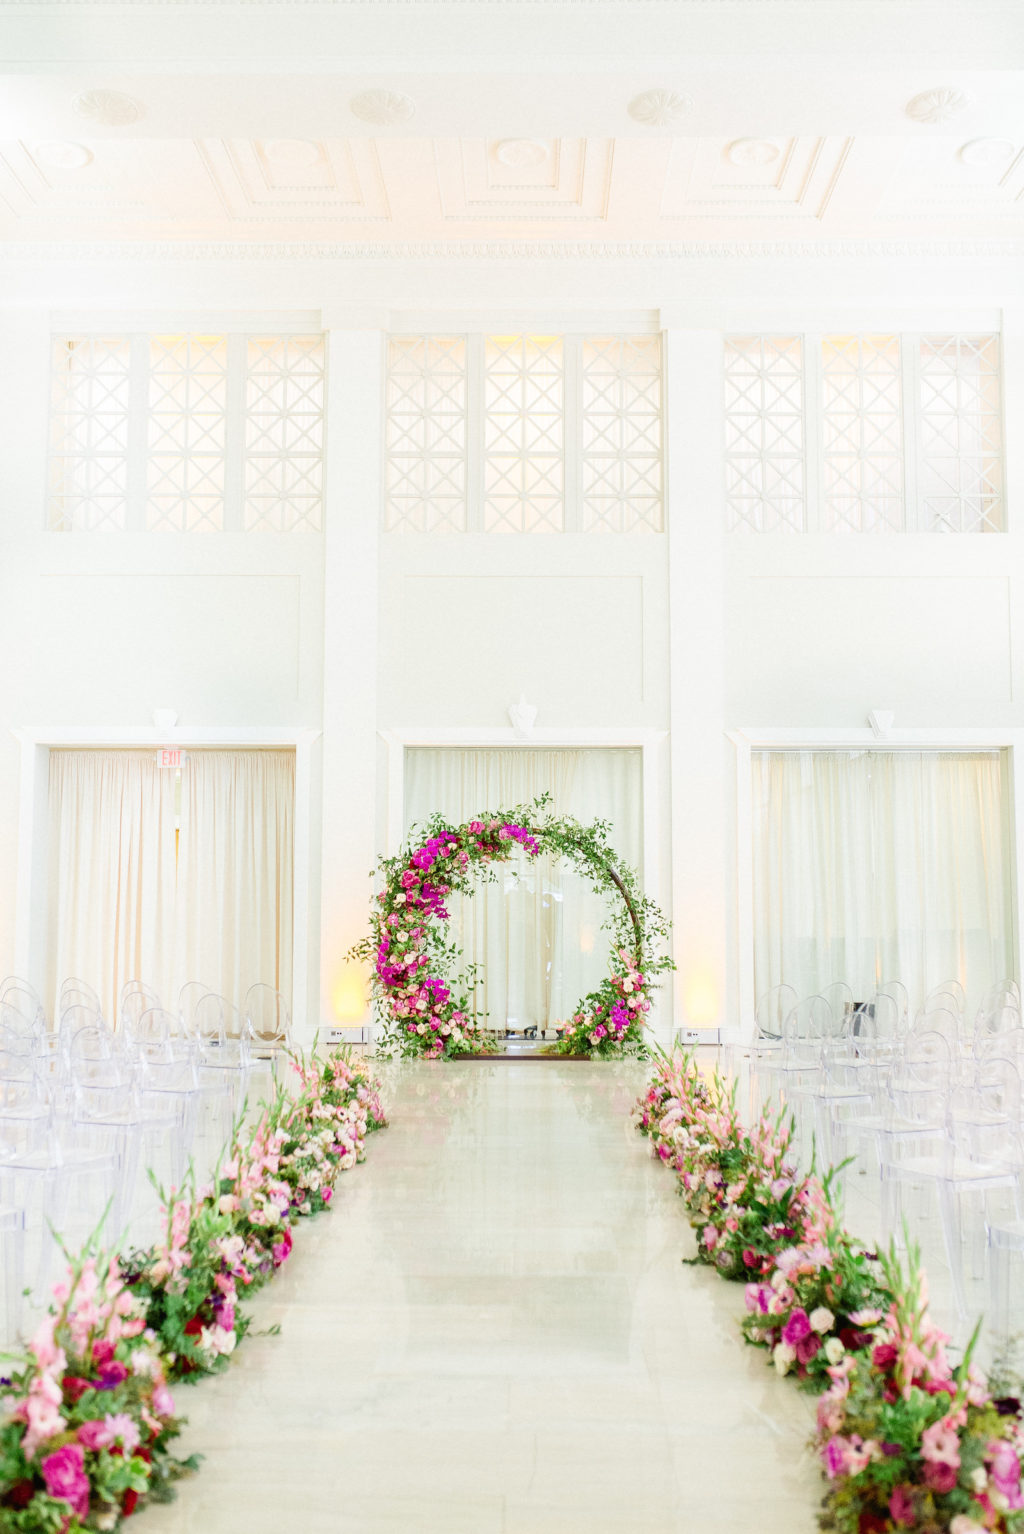 Indoor Downtown Tampa Wedding Ceremony at Tampa Wedding Venue The Vault | Bright Colorful Florida Wedding Ceremony Floral Circle Moon Round Arch with Pink Roses and Purple Orchids and Greenery | Ceremony Aisle Flowers with Blush Pink Gladiolas | Clear Ghost Chairs from Kate Ryan Event Rentals